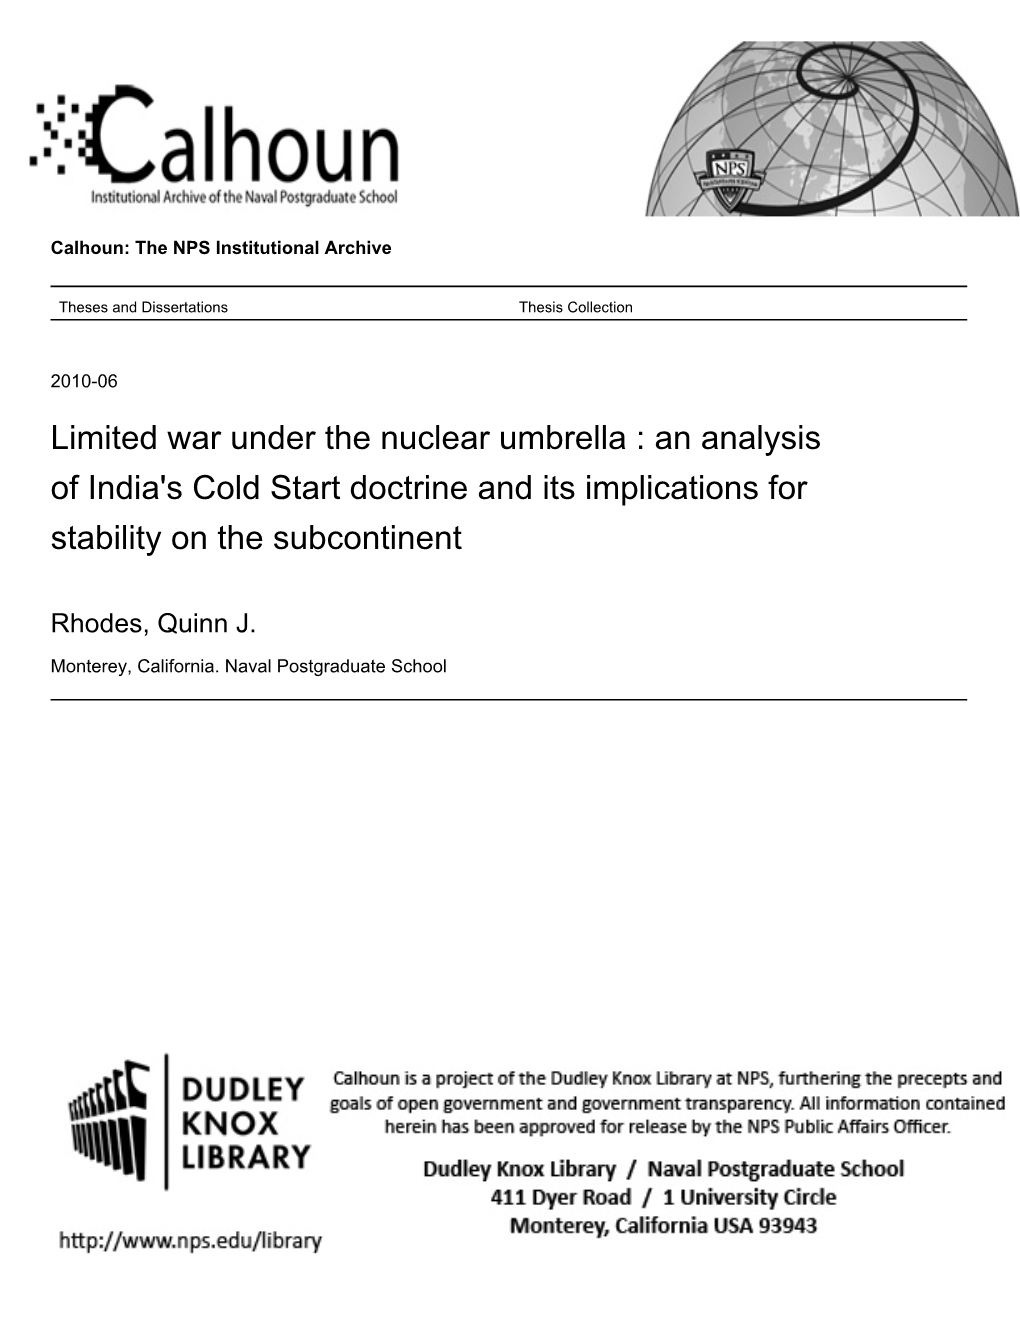 Limited War Under the Nuclear Umbrella : an Analysis of India's Cold Start Doctrine and Its Implications for Stability on the Subcontinent